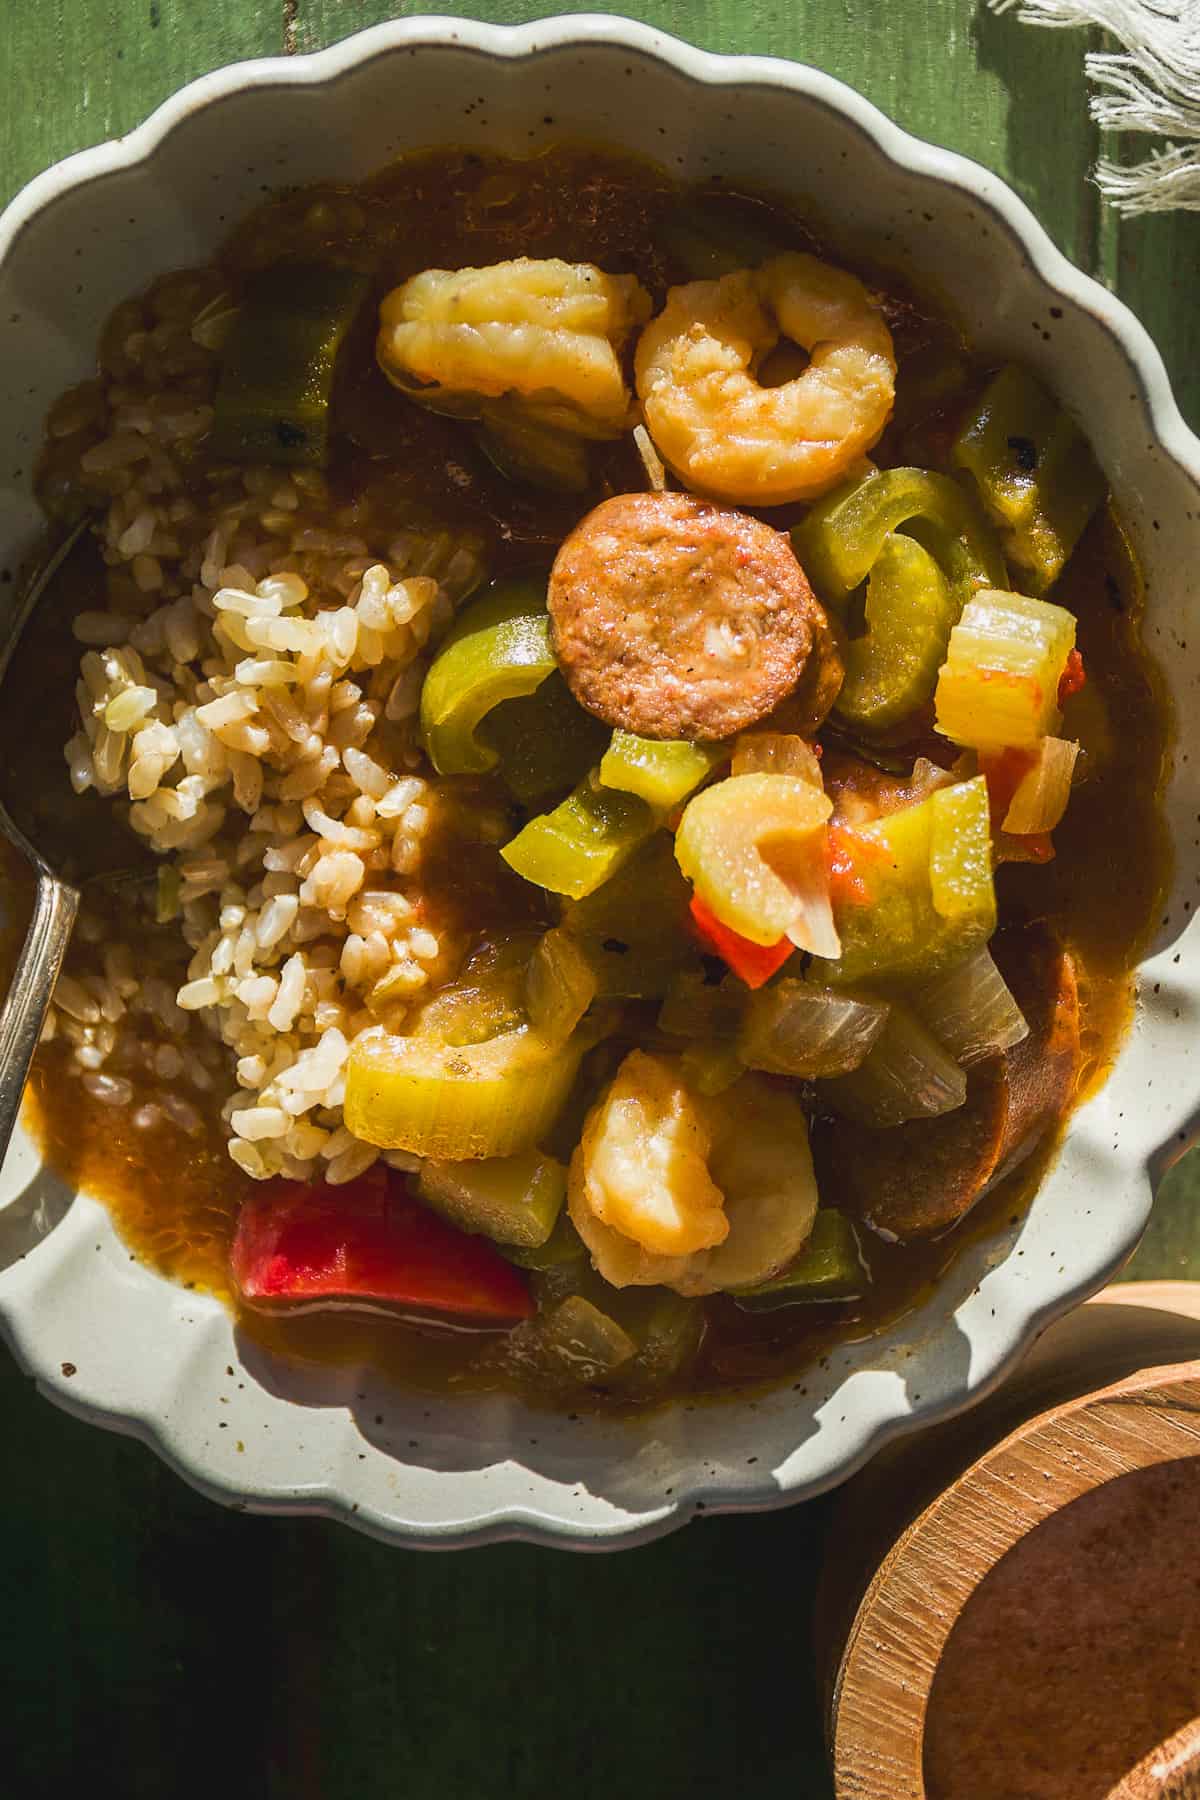 Gumbo with brown rice in a shallow bowl with a spoon.